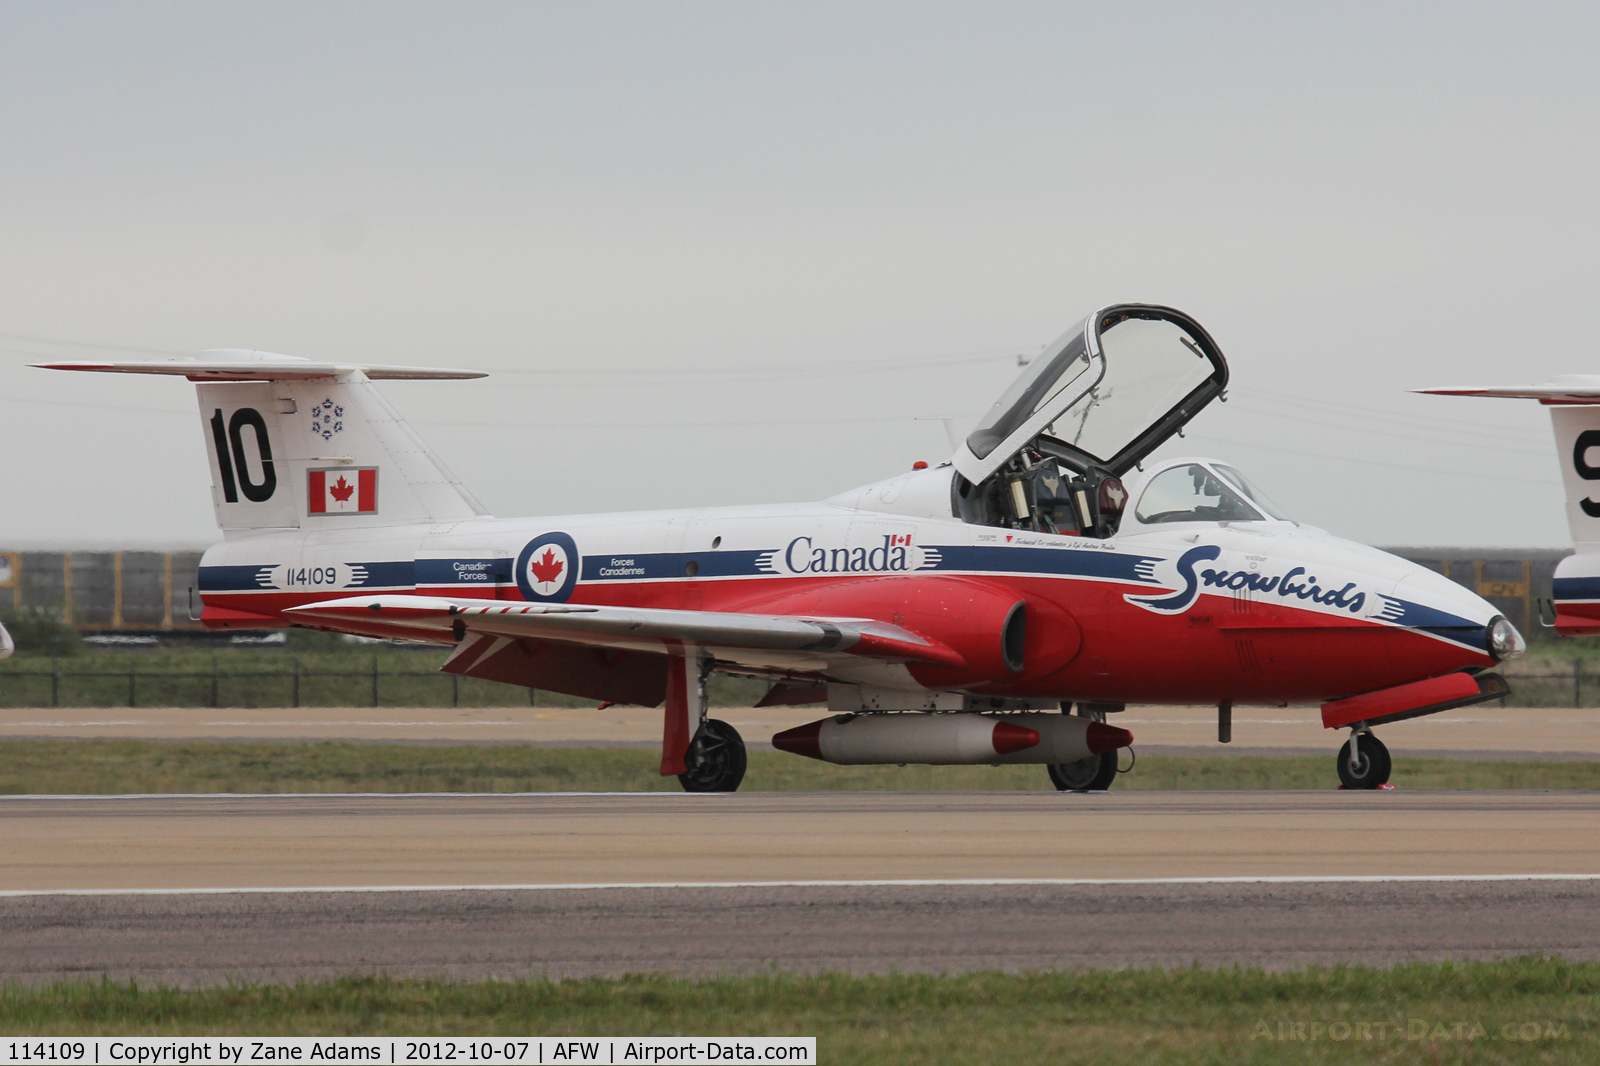 114109, Canadair CT-114 Tutor C/N 1109, At the 2012 Alliance Airshow - Fort Worth, TX